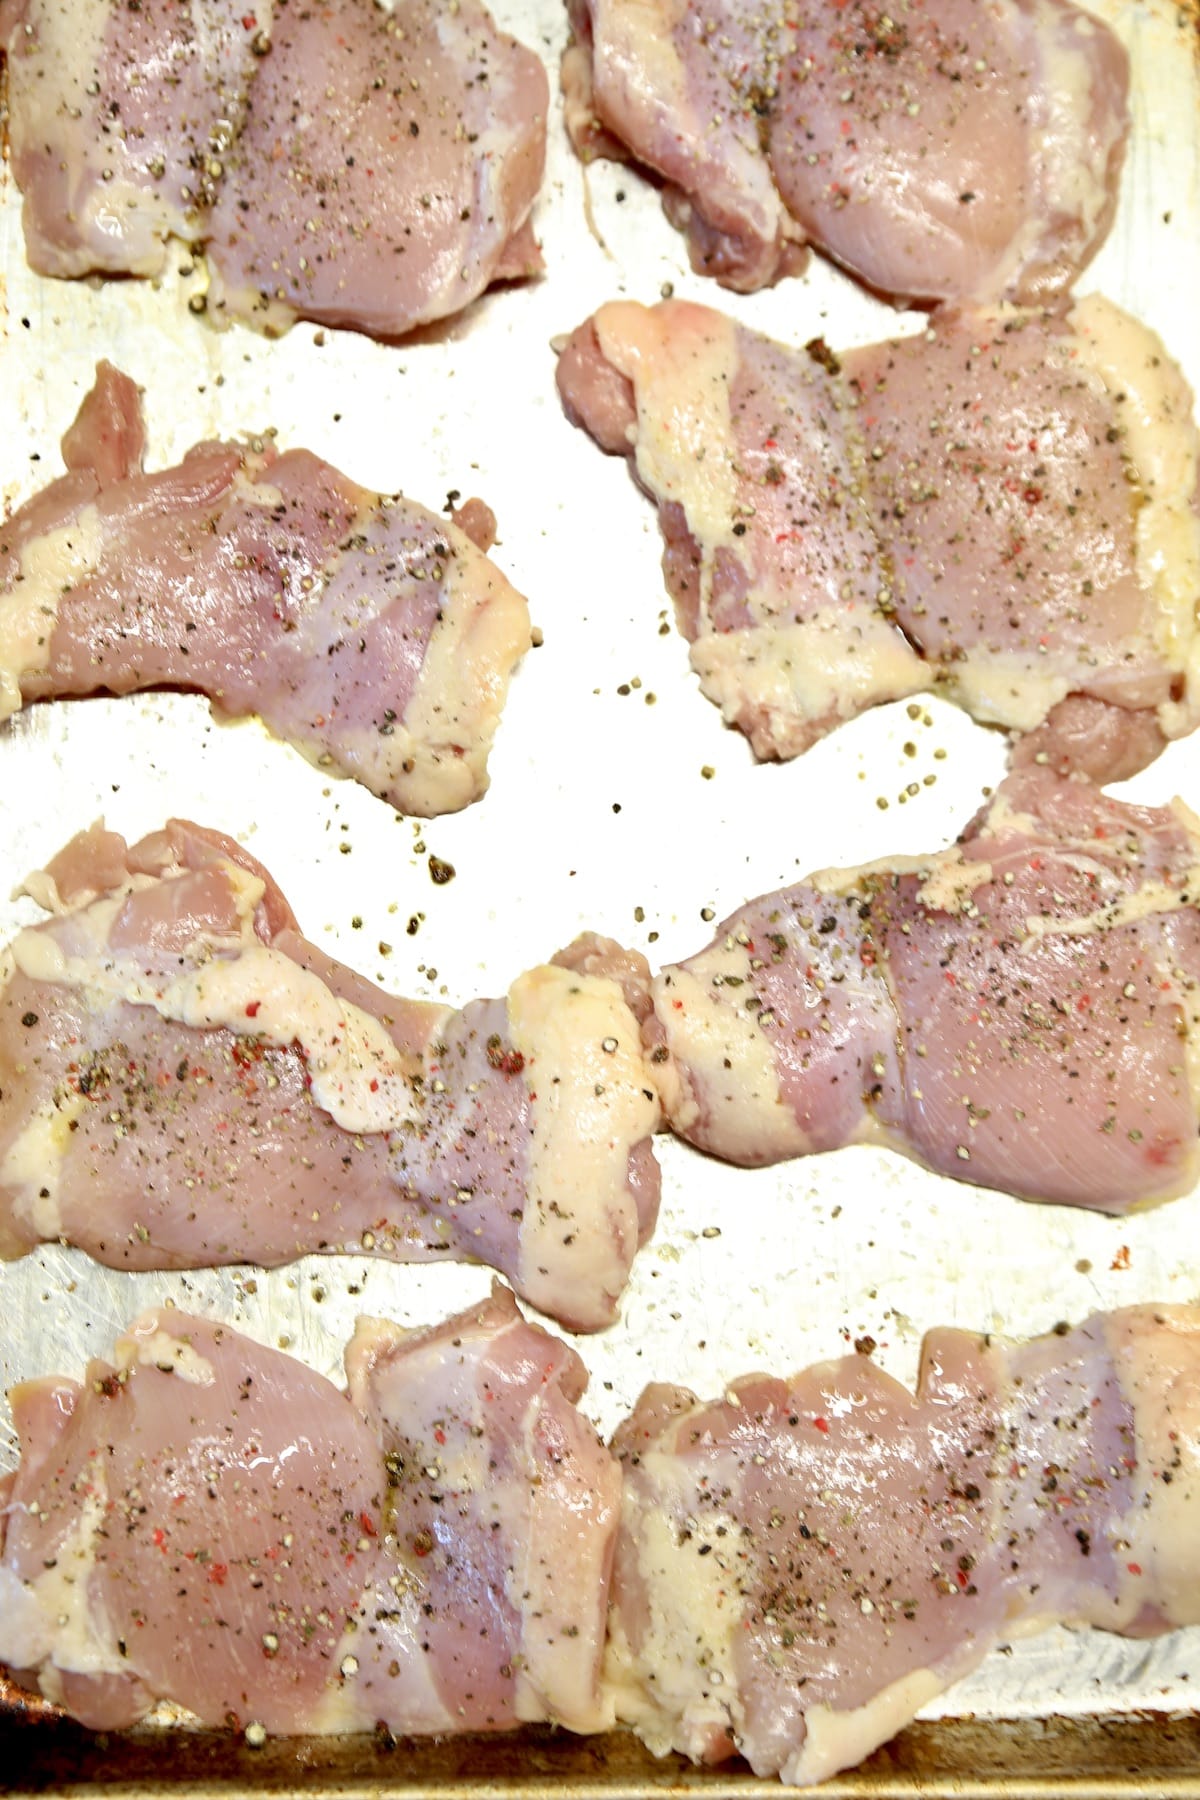 Sheet pan with raw chicken thighs, seasoned with salt and pepper.